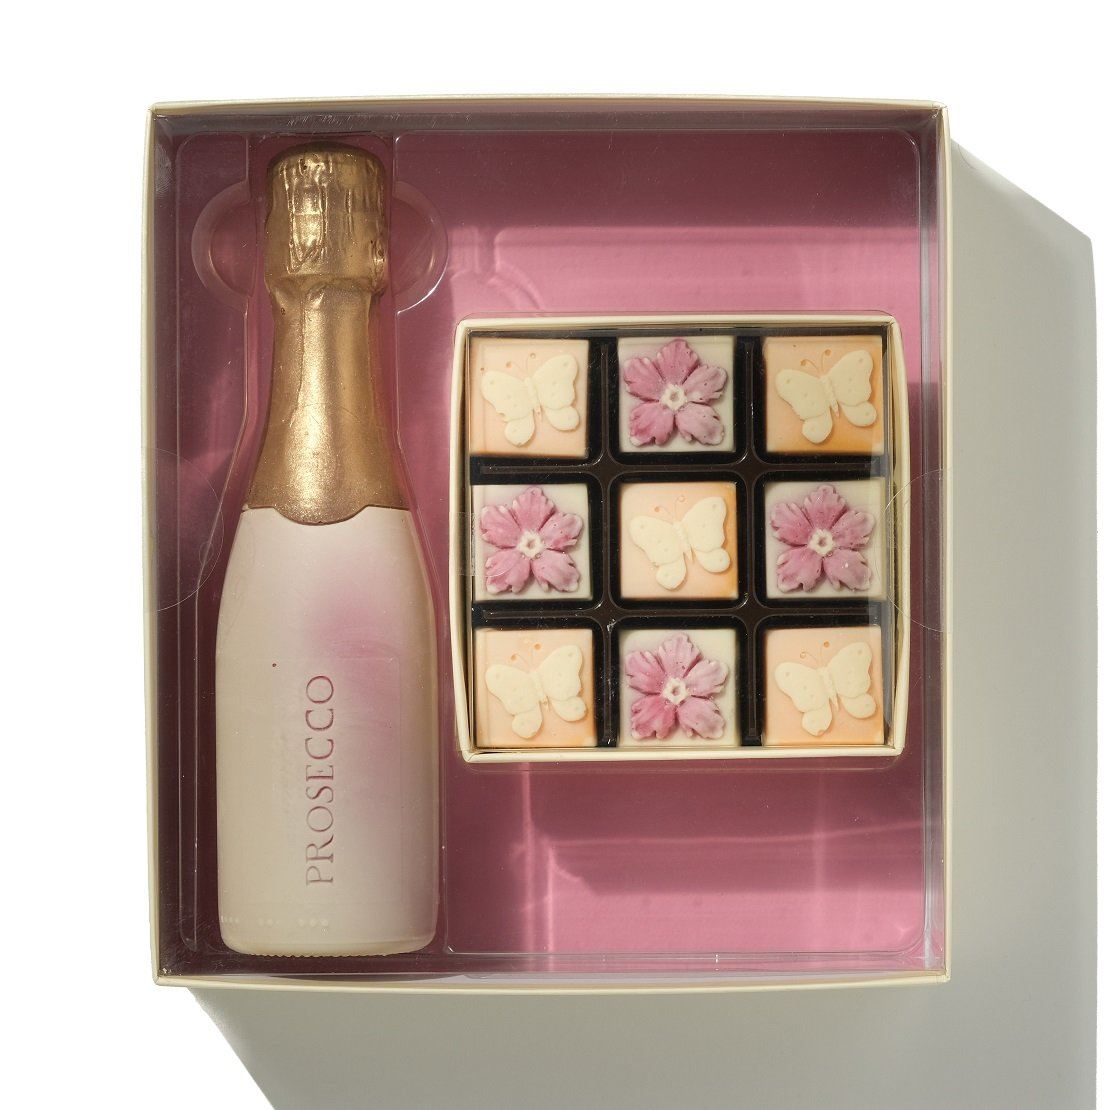 Chocolate Prosecco With Flowers And Butterflies Gift Box